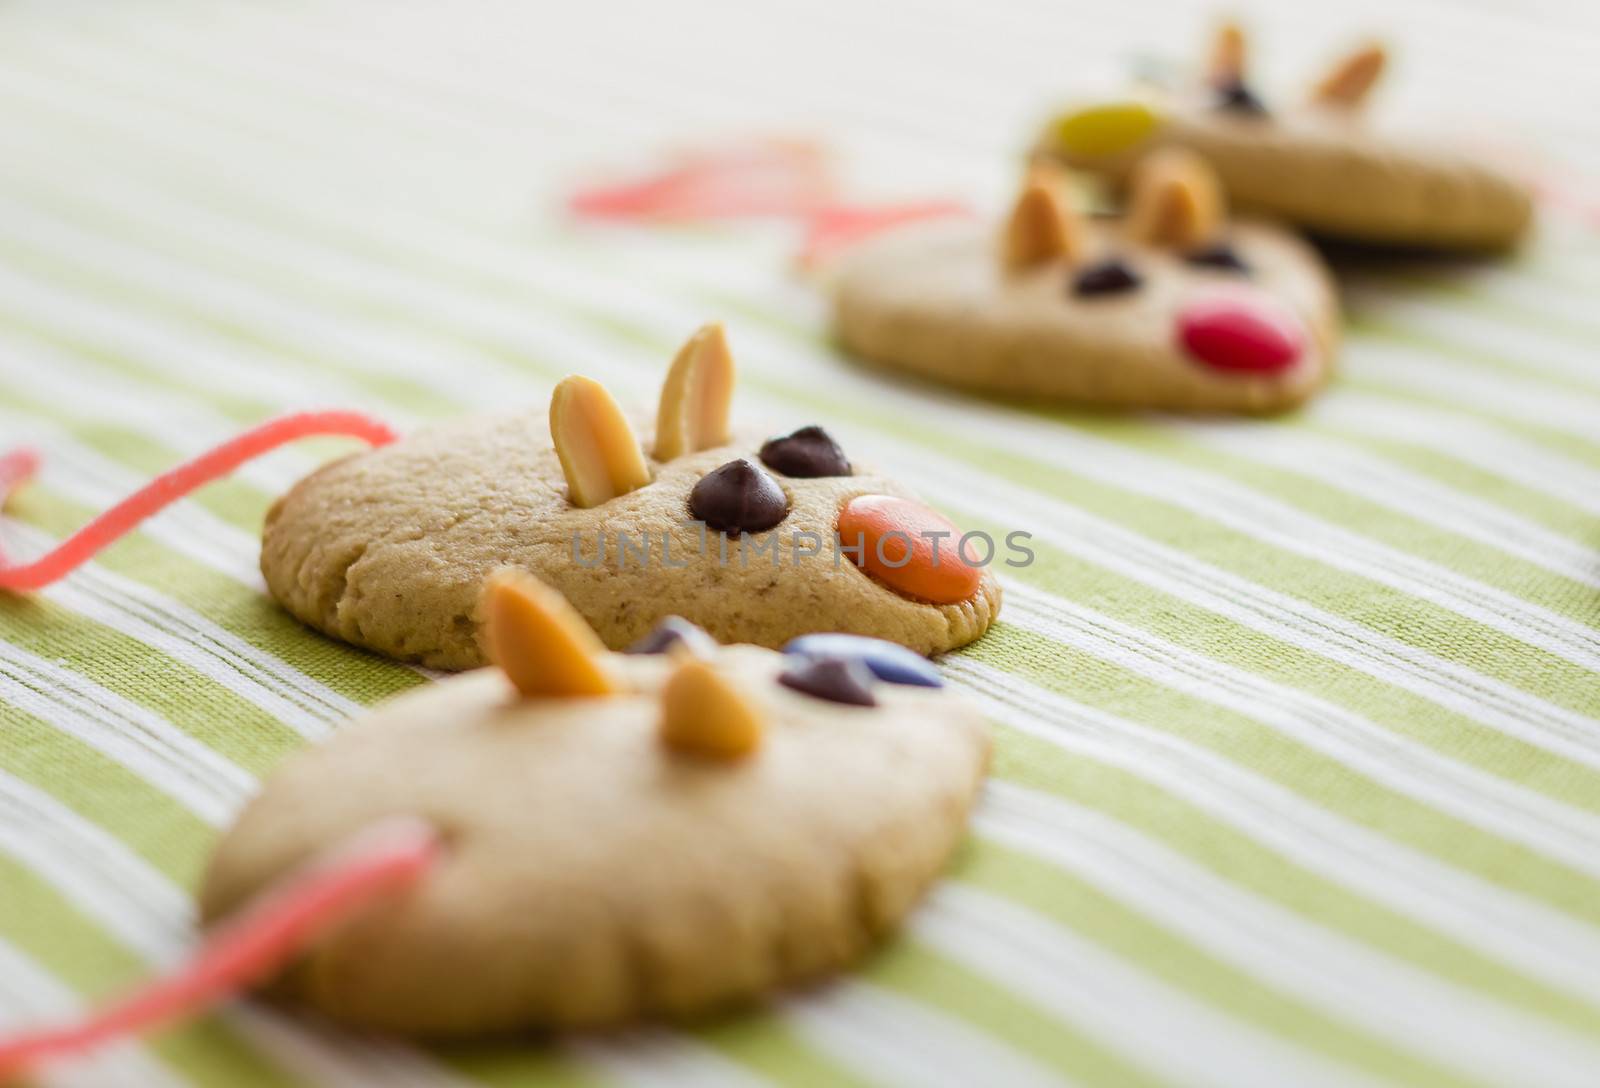 Cookies with mouse shaped and red licorice tail by doble.d